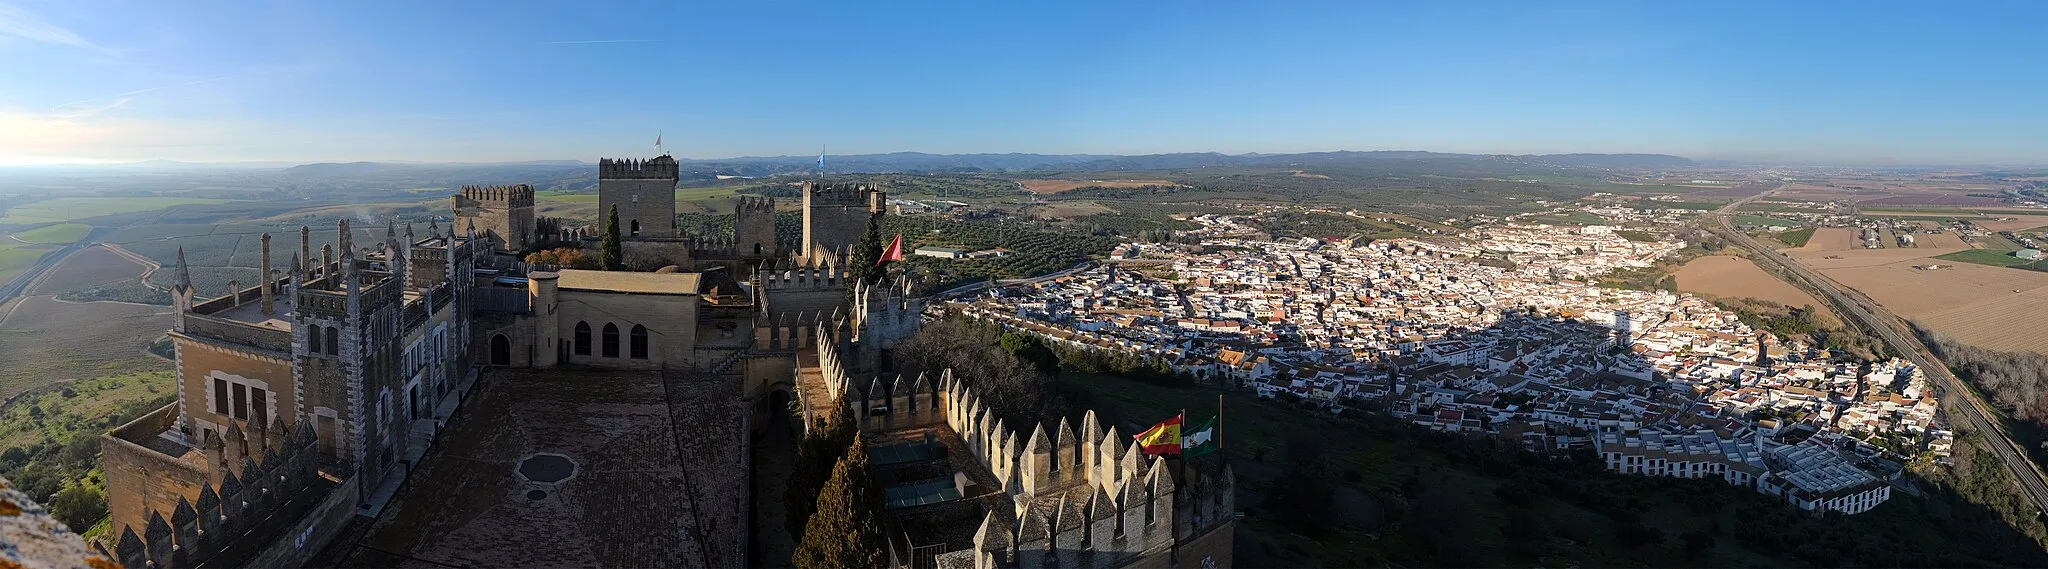 Photo showing: Panoramic view from Torre del Homenaje, the highest tower, of Castle of Almodóvar del Río.